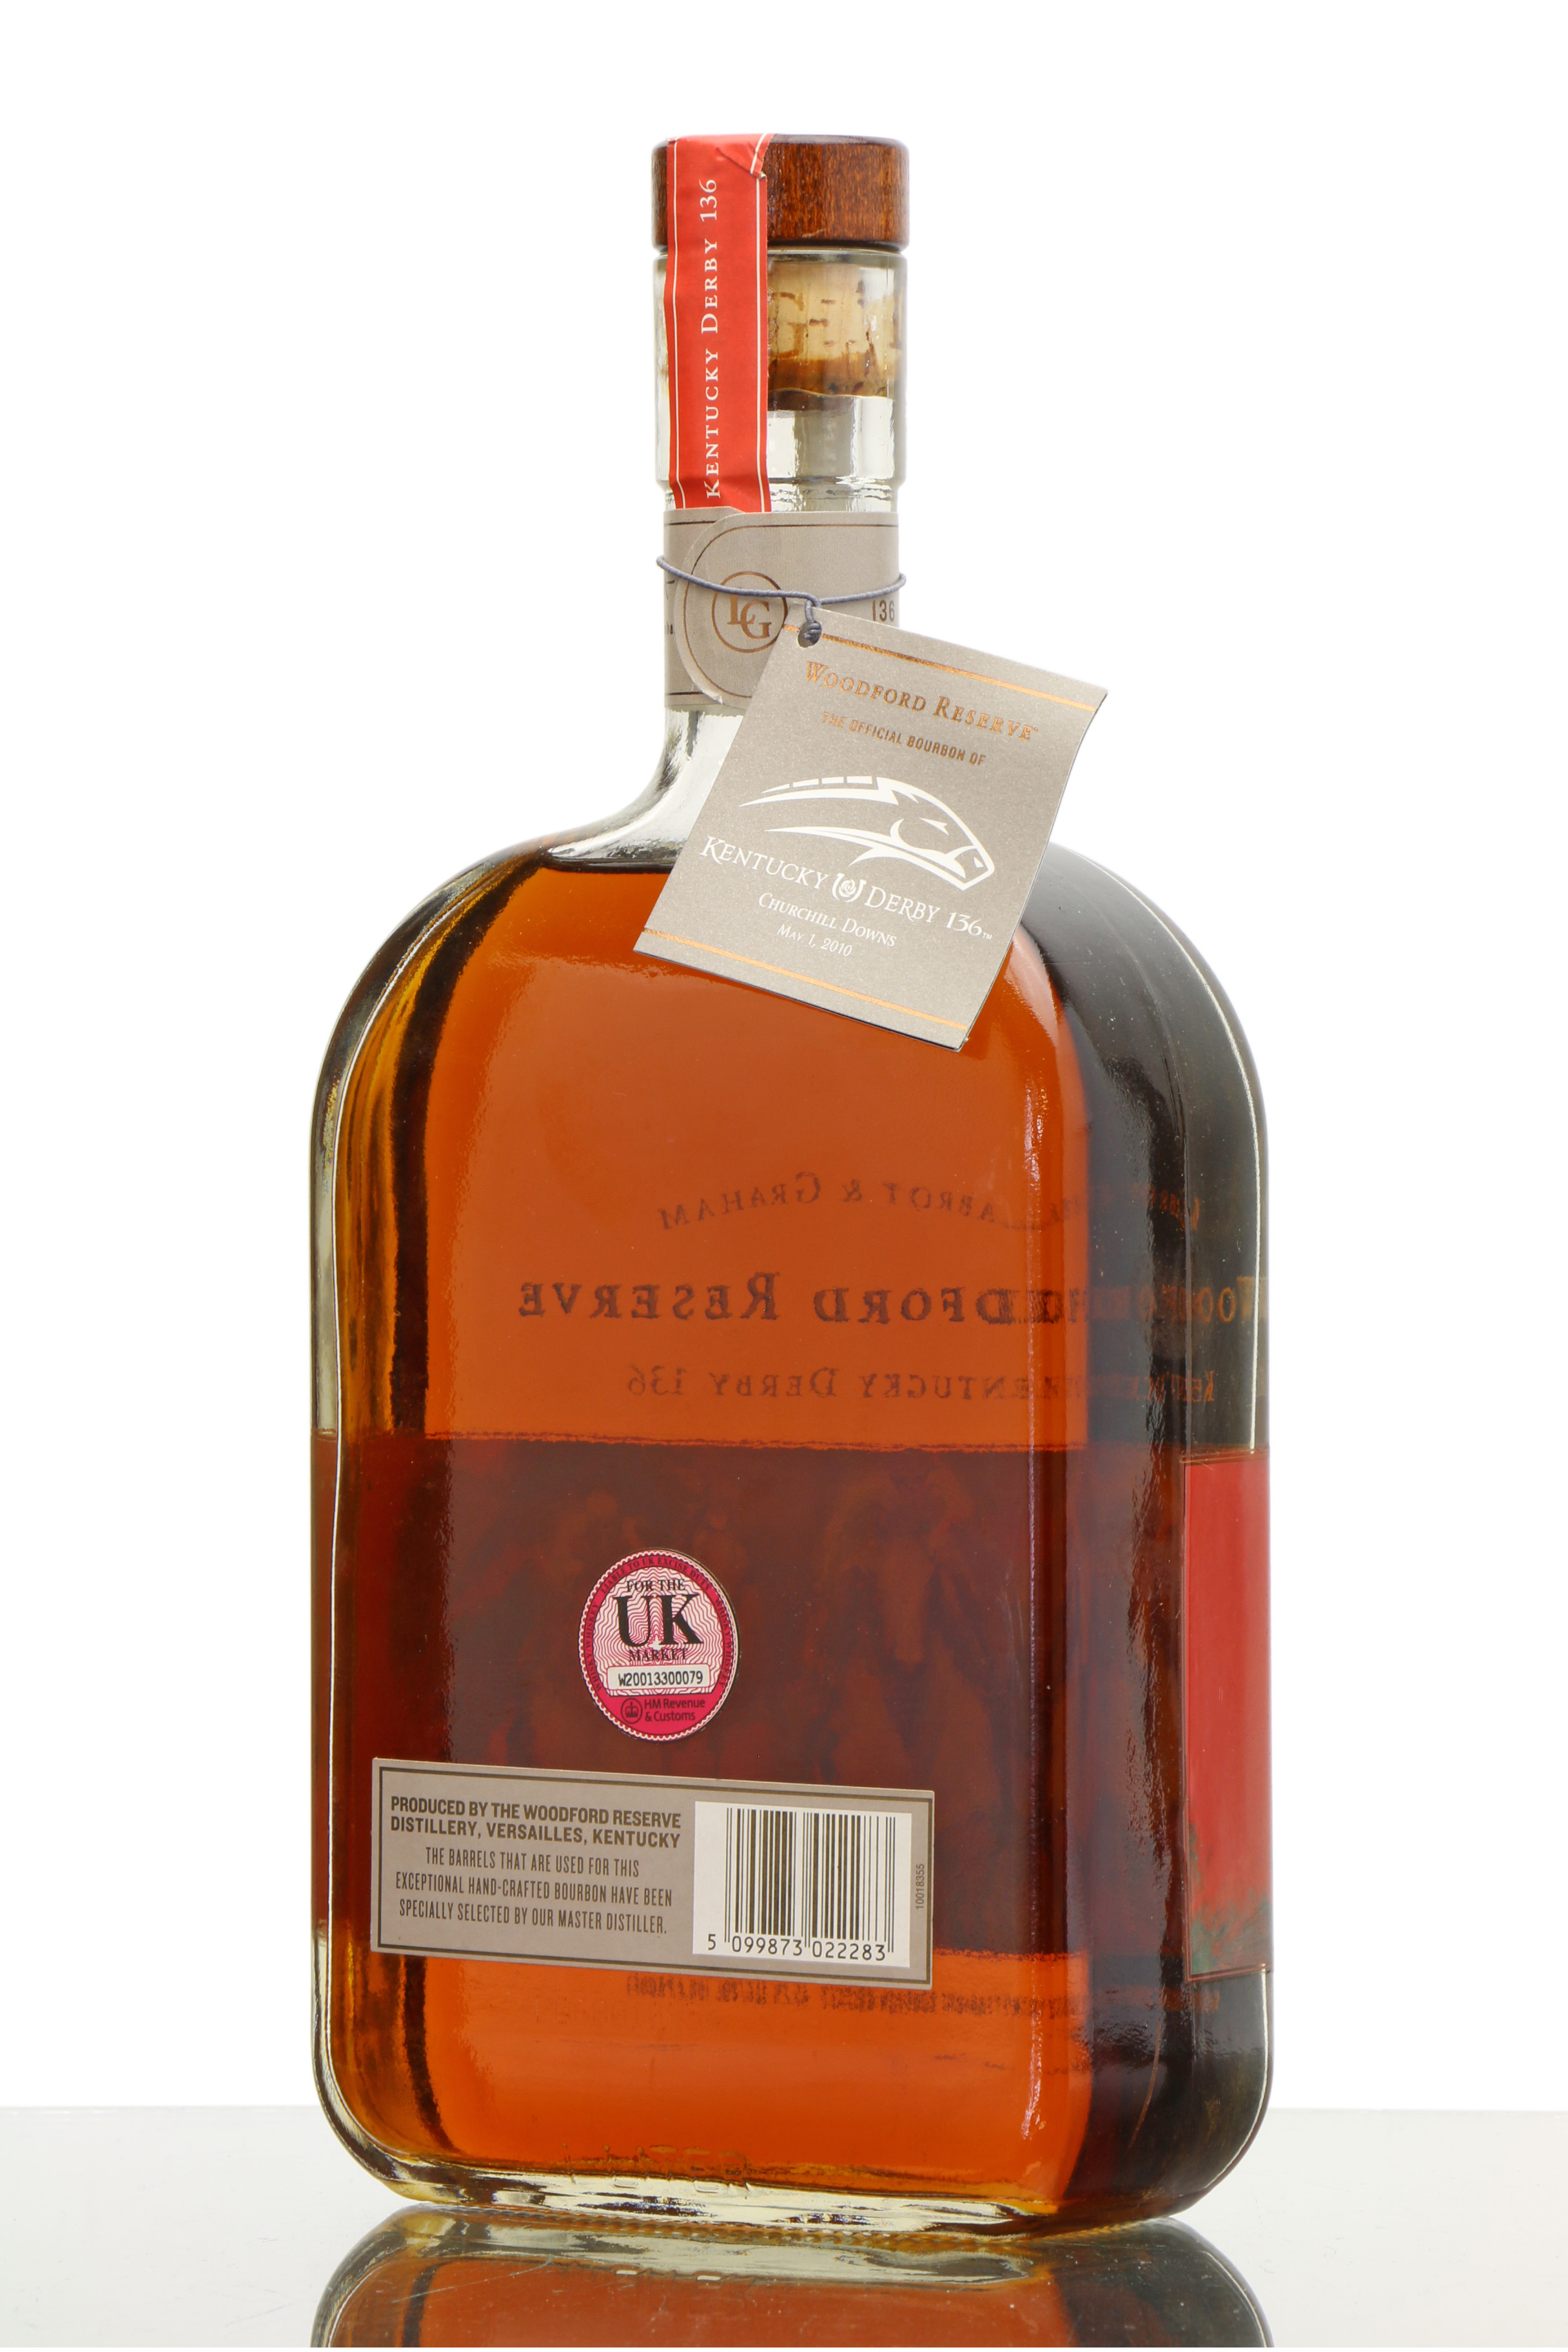 Woodford Reserve Kentucky Derby 136 (1 Litre) Just Whisky Auctions